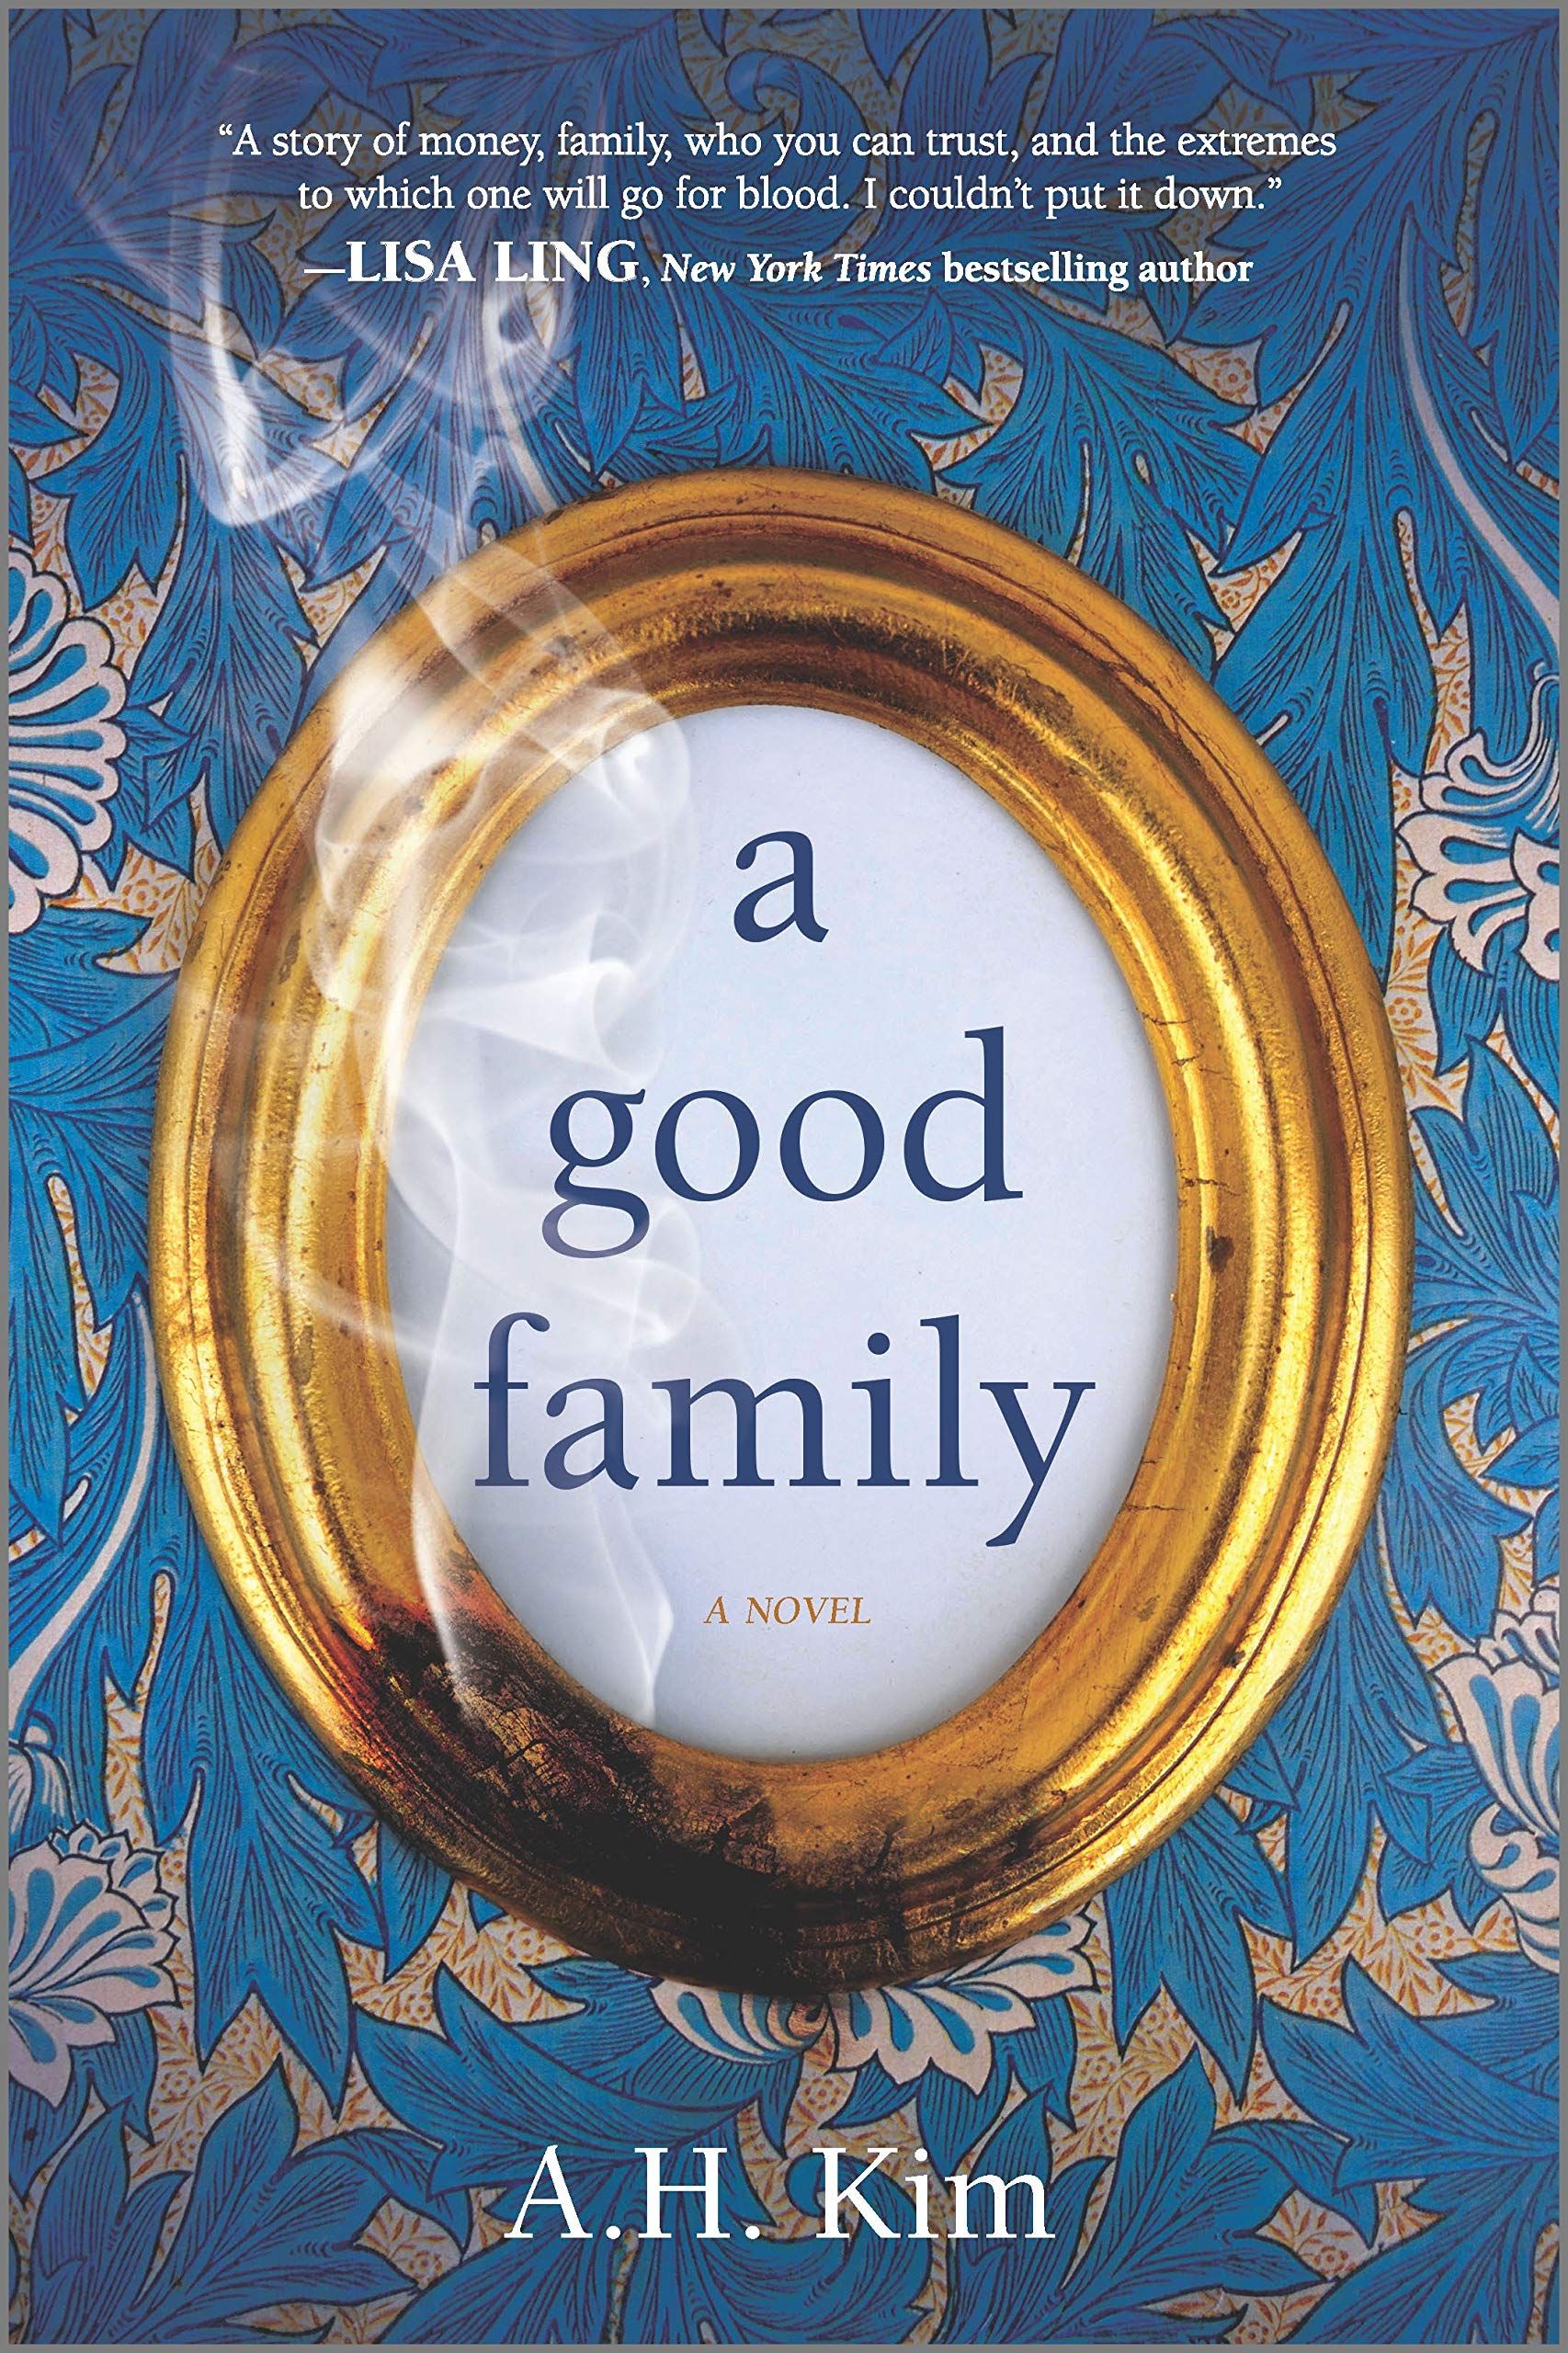 A Good Family book cover